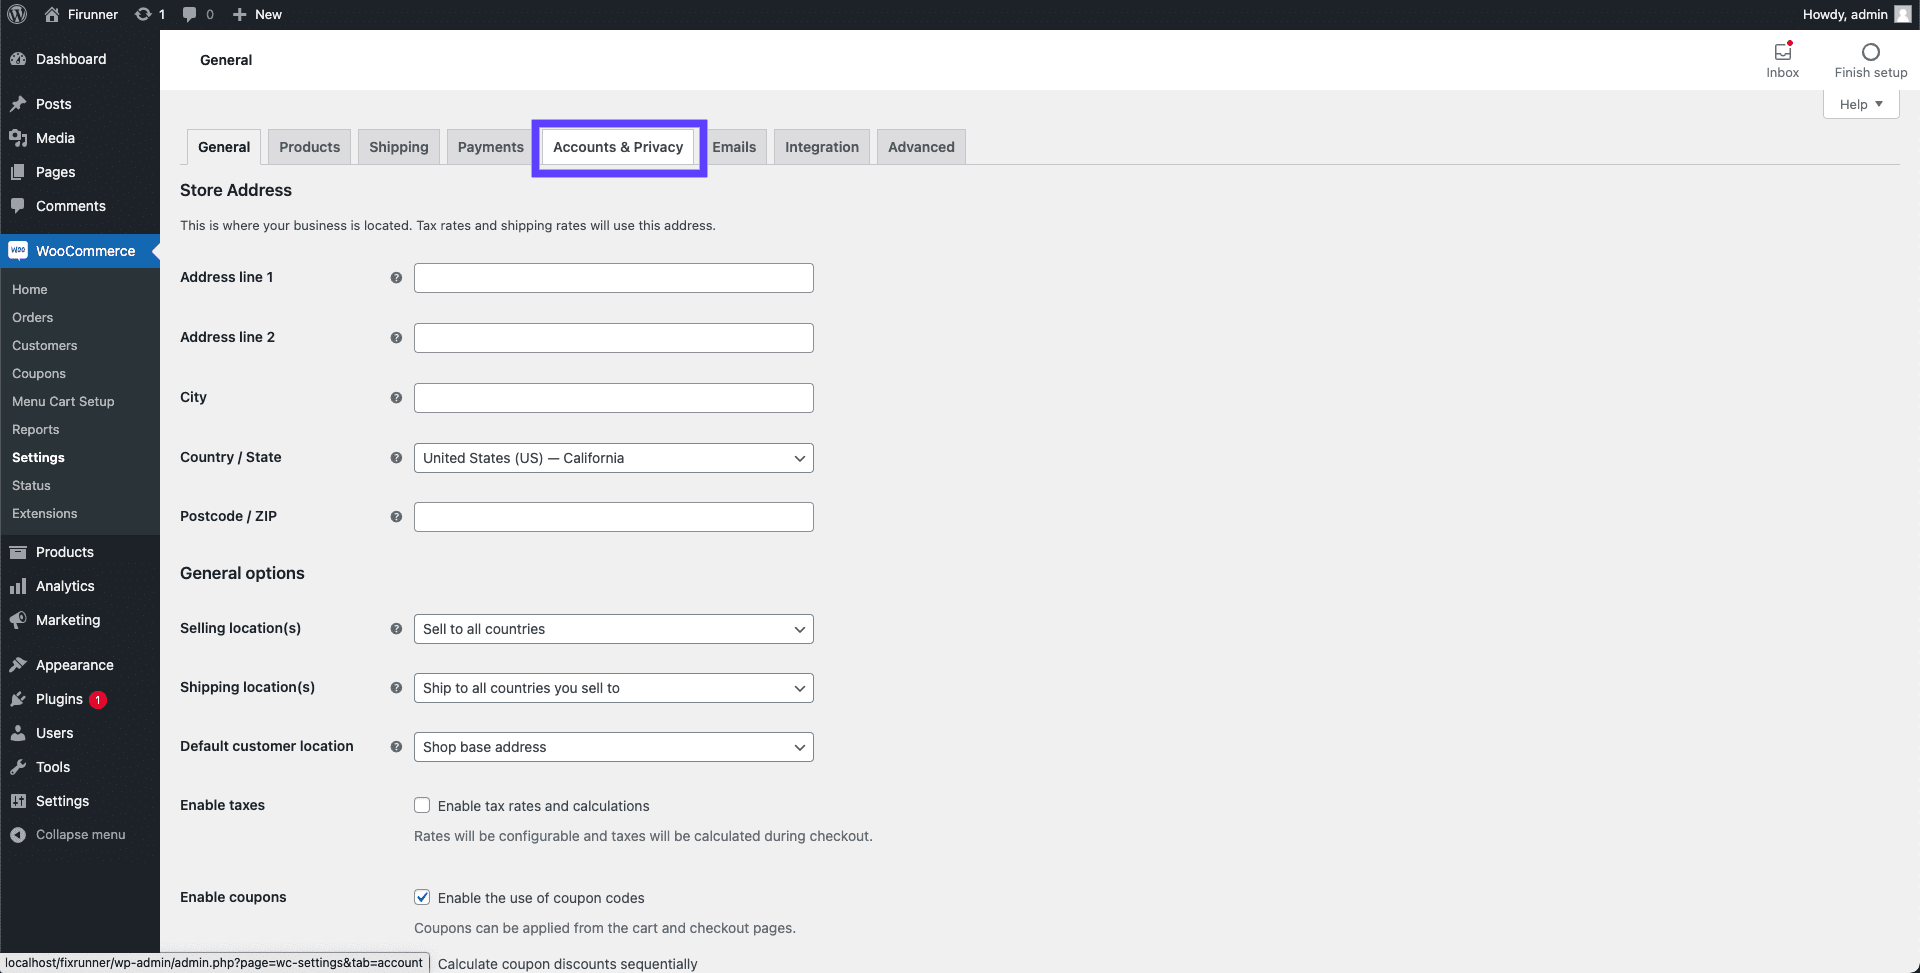 Accounts & Privacy” section - Recover abandoned cart in WooCommerce